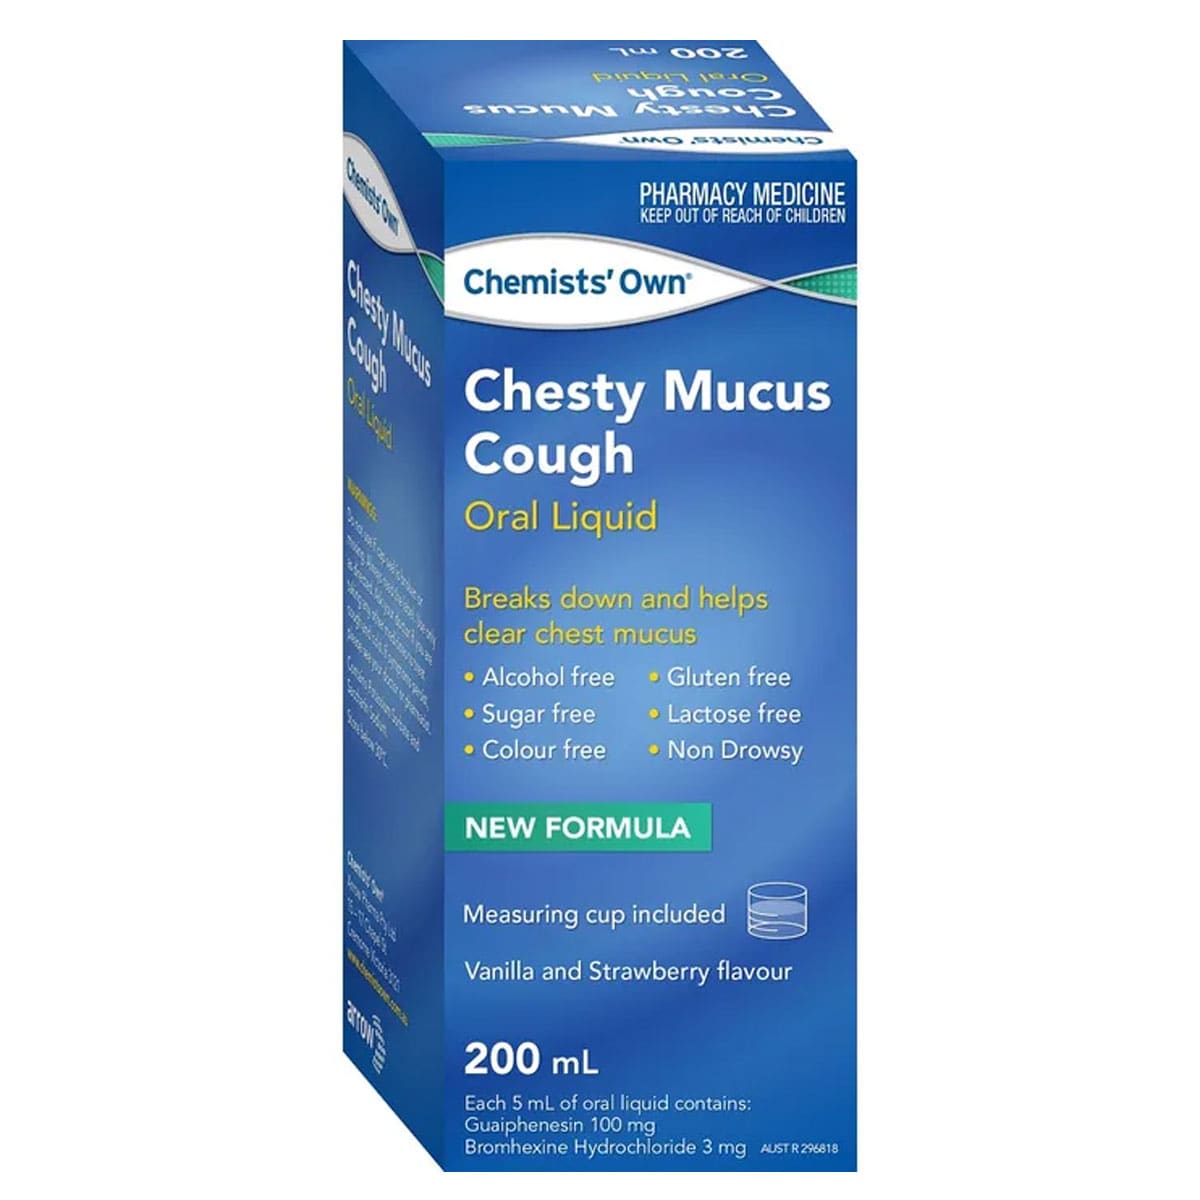 Chemists Own Chesty Mucus Cough 200ml